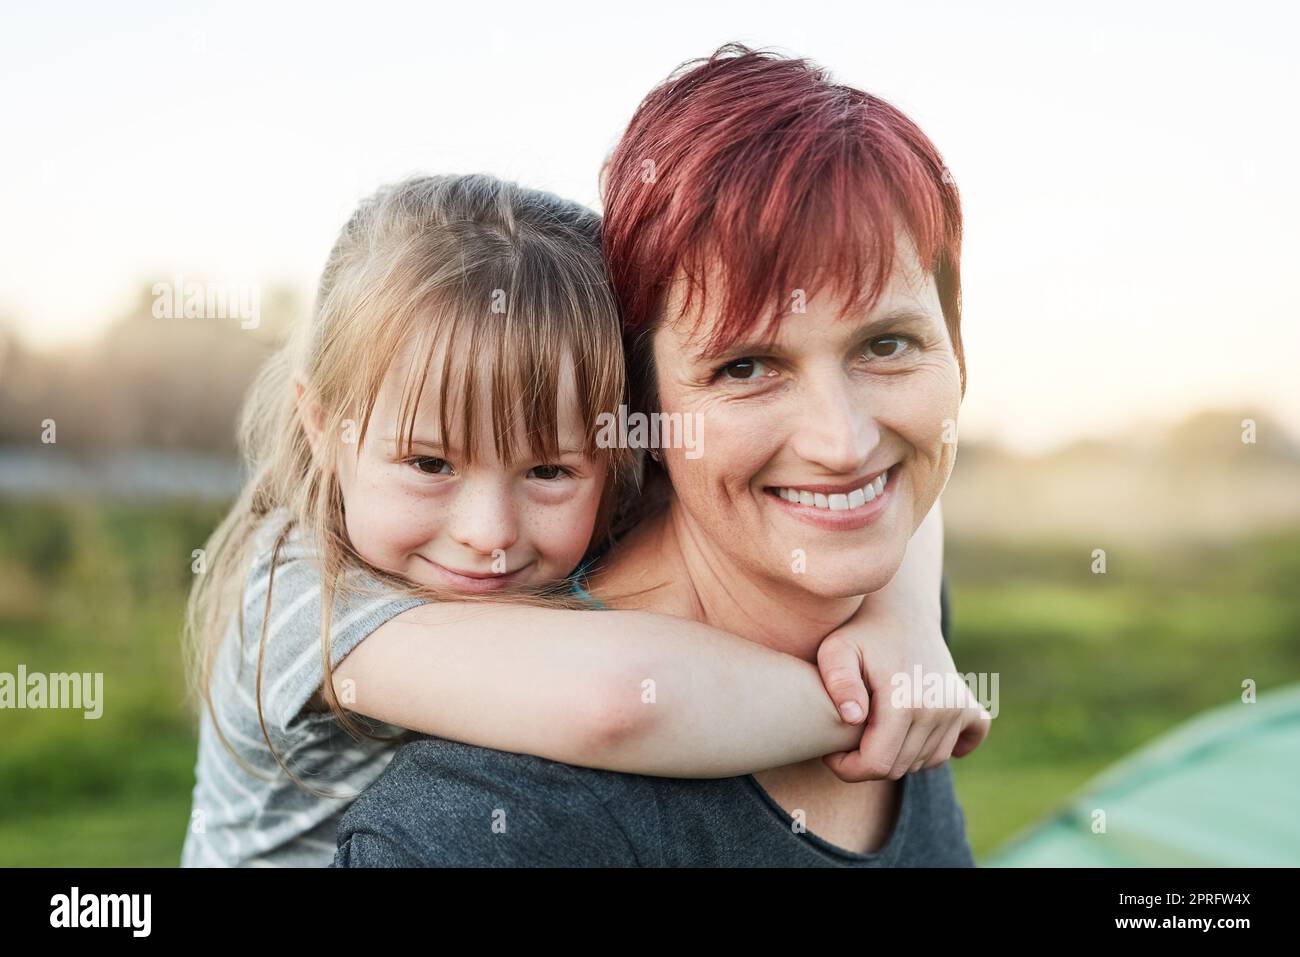 Mommy is my best friend. Cropped portrait of a little girl and her mother standing outside. Stock Photo